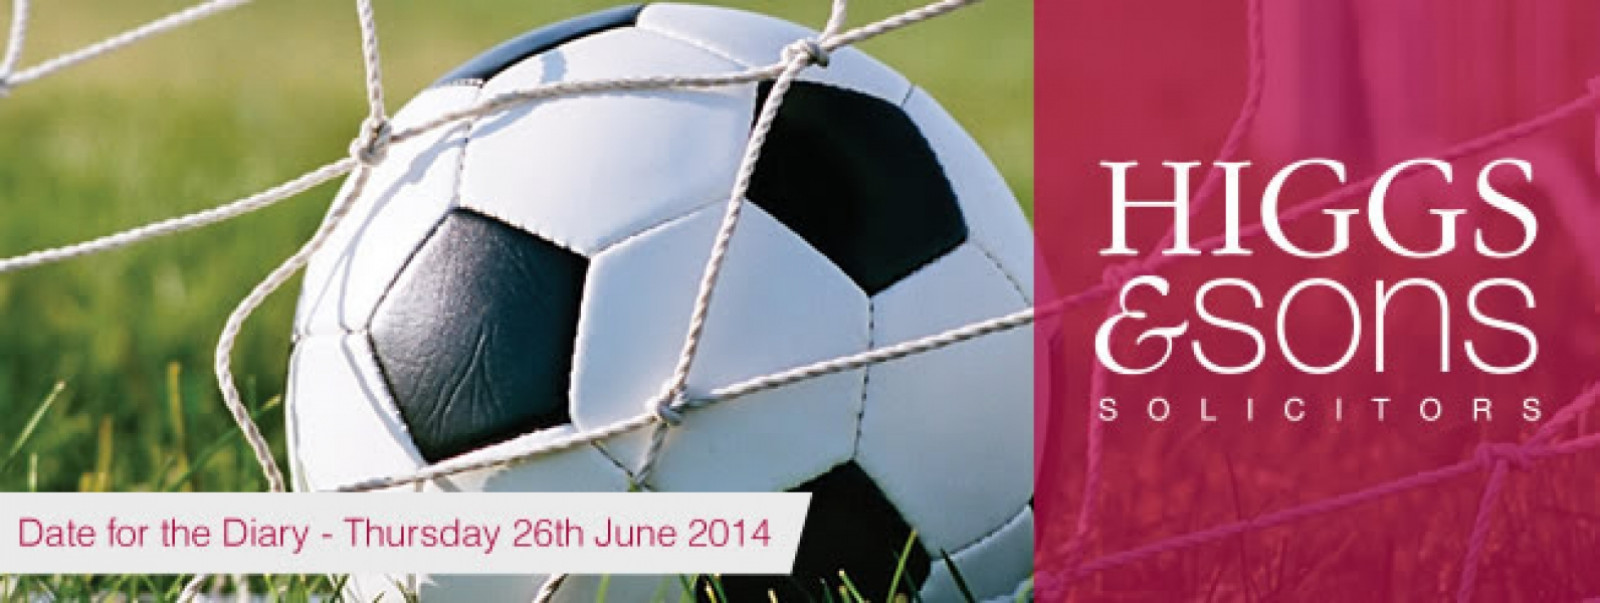 Higgs & Sons Charity Football Tournament 2014